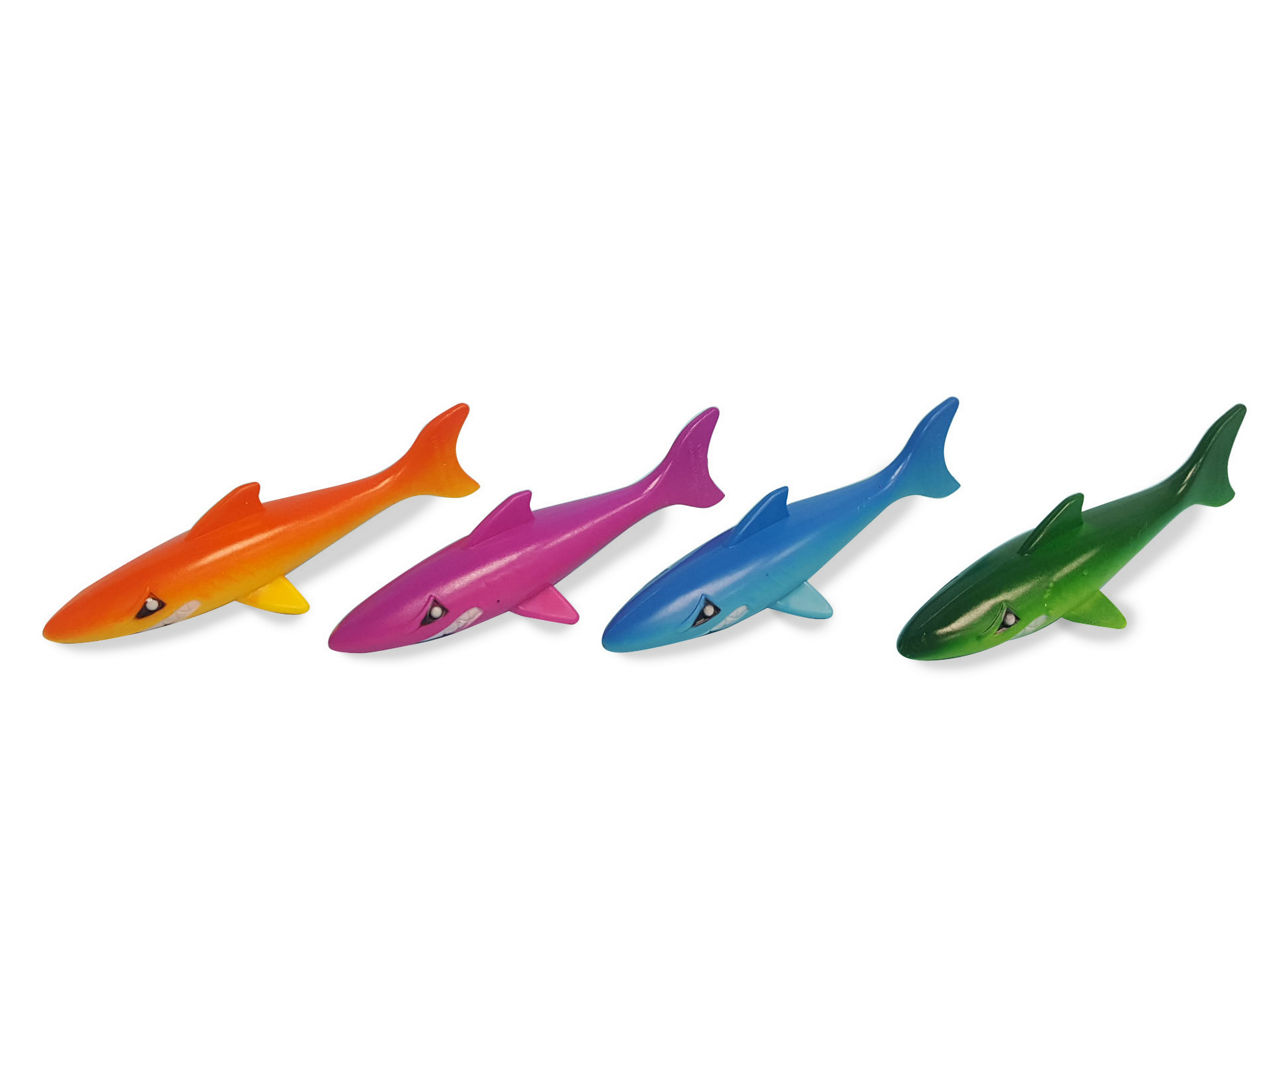 Time To Splash Dive Torpedo Sharks And Fishes Figures 4 Pack Water Toys 